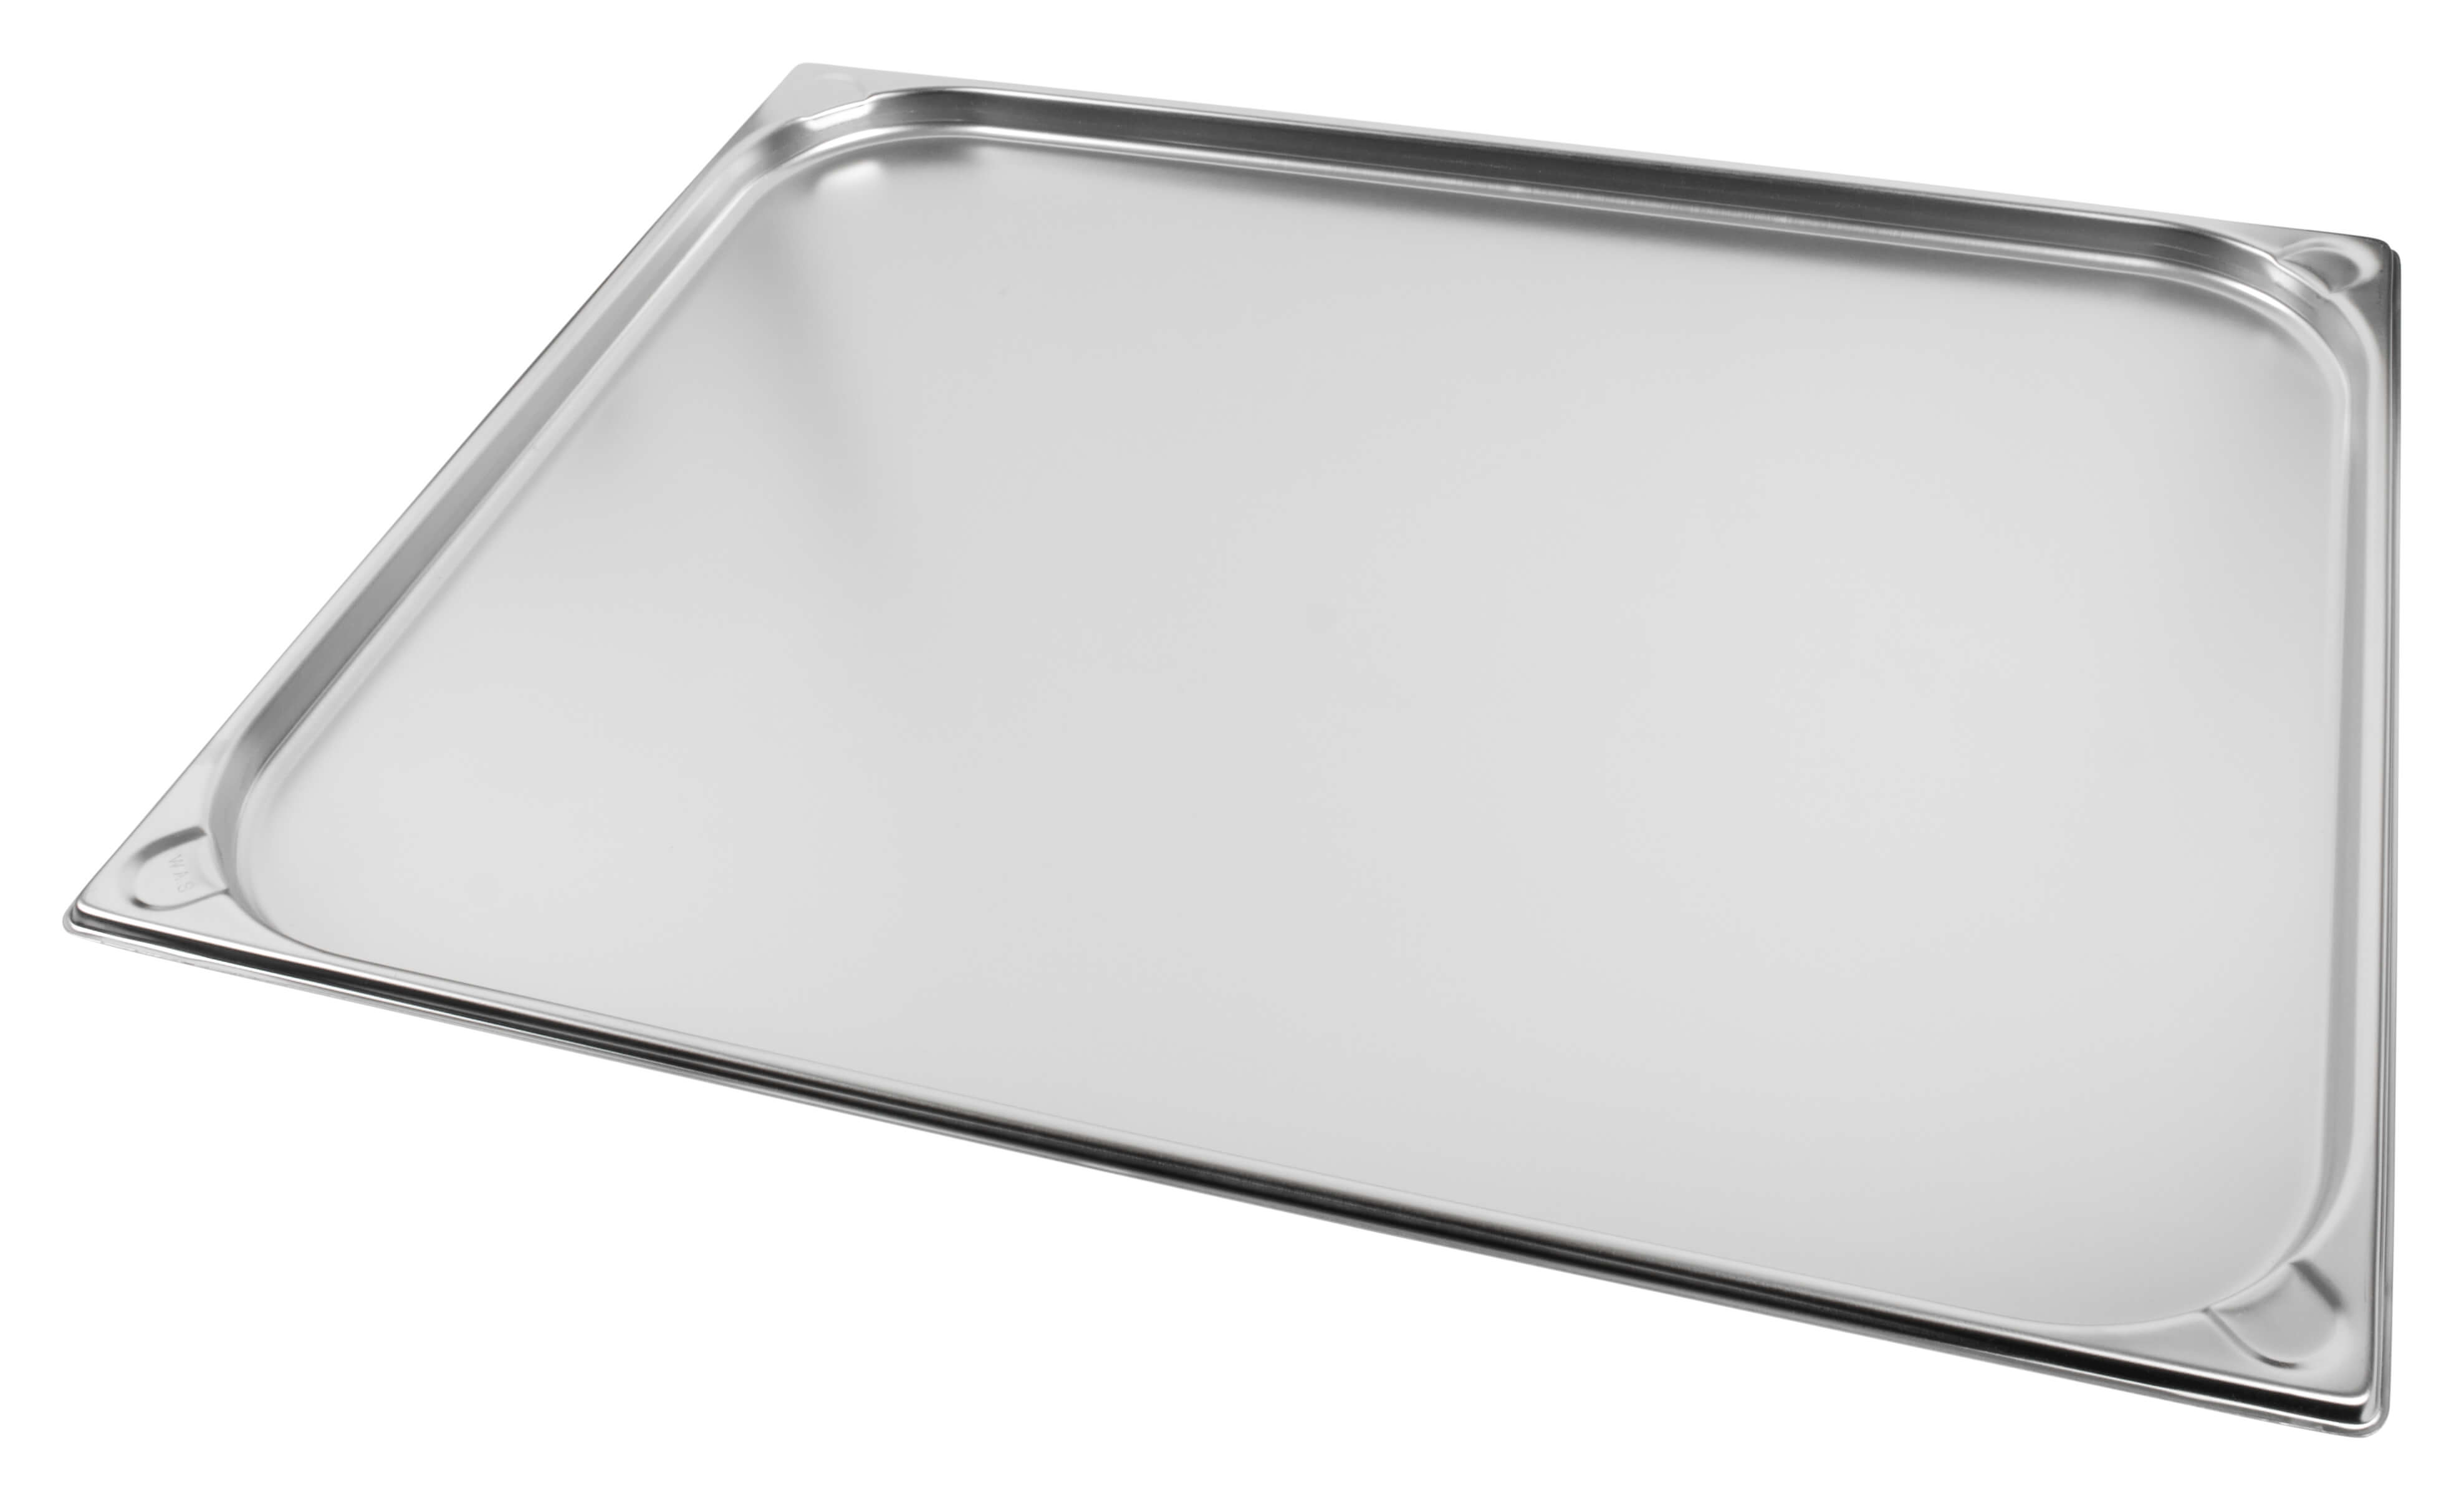 Gastronomy-standard tray 20mm depth - stainless steel (GN 2/1)